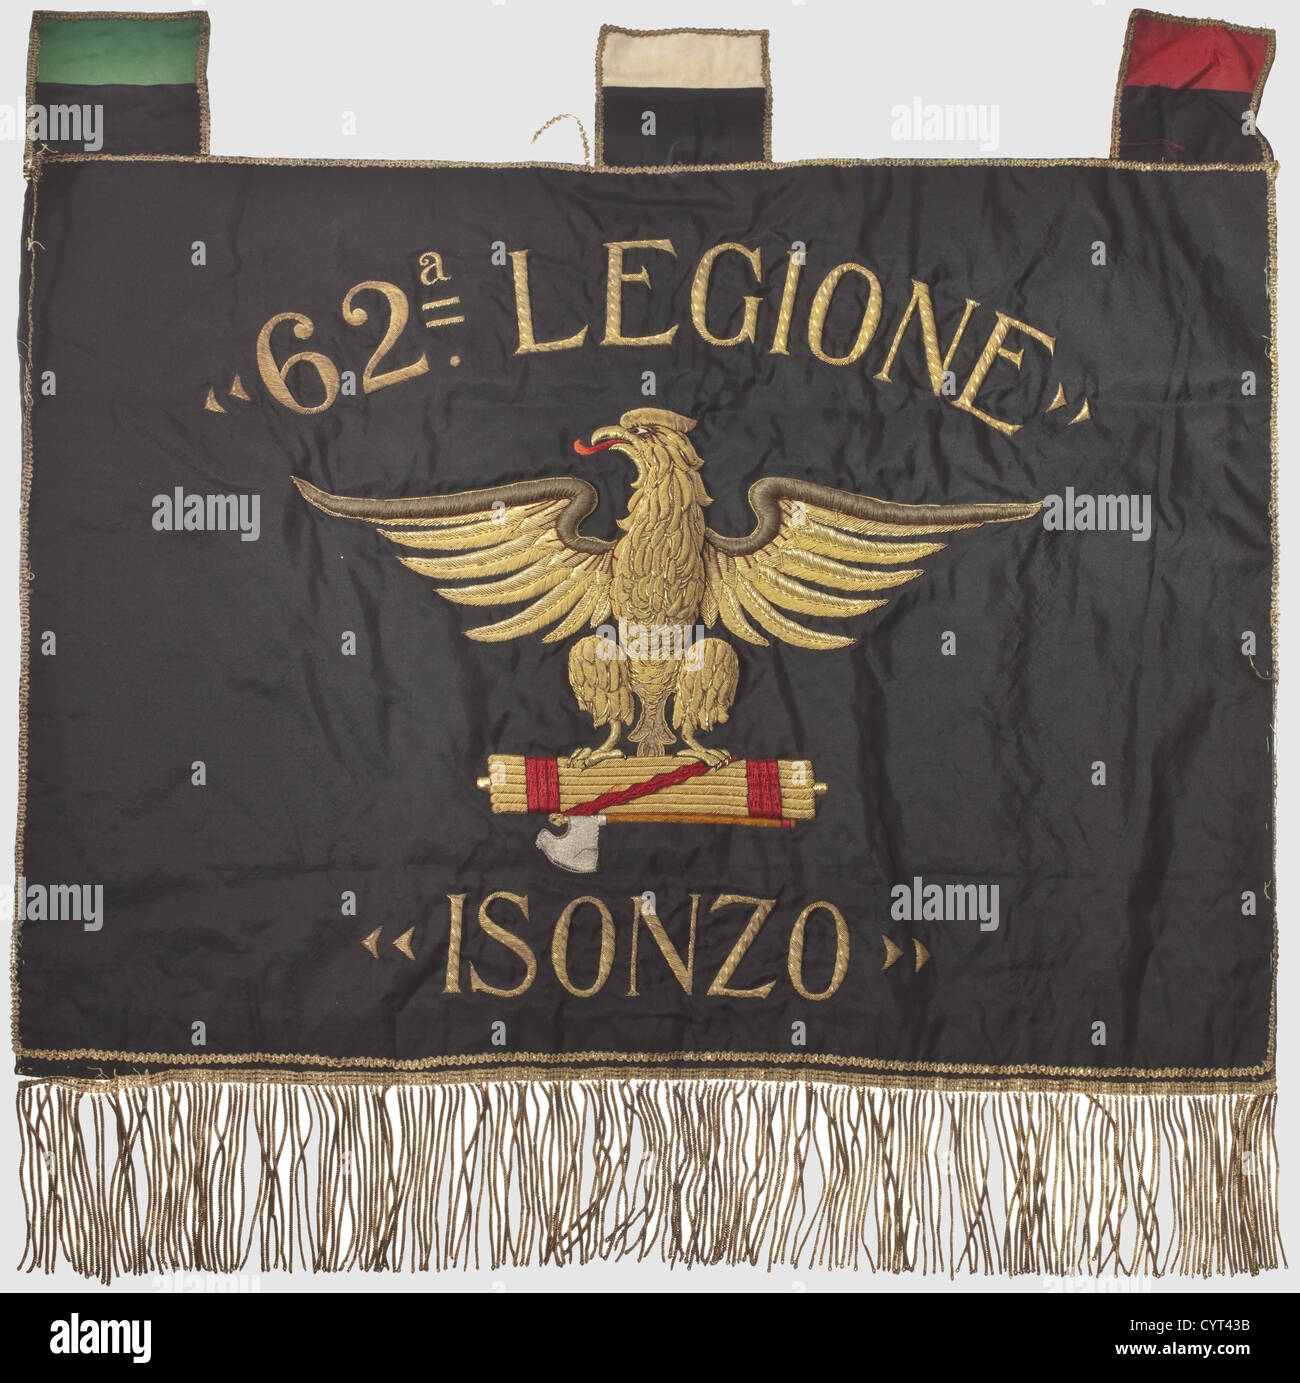 An Italian MVSN Black Shirt Banner,for the 62nd 'Isonzo' Legion The front is of black standart cloth displaying '62 LEGIONE ISONZO' and the eagle with a lictor's bundle in heavy,elaborate gold embroidery.Unfortunately,there is only a fragment of the back with the Italian royal arms available.Gold fringe on the bottom.Size 67 x60 cm.The 62nd 'Isonzo' Legion was based at Gormizia.Very rare standart for the fascist militia,unfortunately incomplete.Of extremely high quality.Because of the height of the Lyon embroidery,the large embroidered eagle is almo,Additional-Rights-Clearences-Not Available Stock Photo